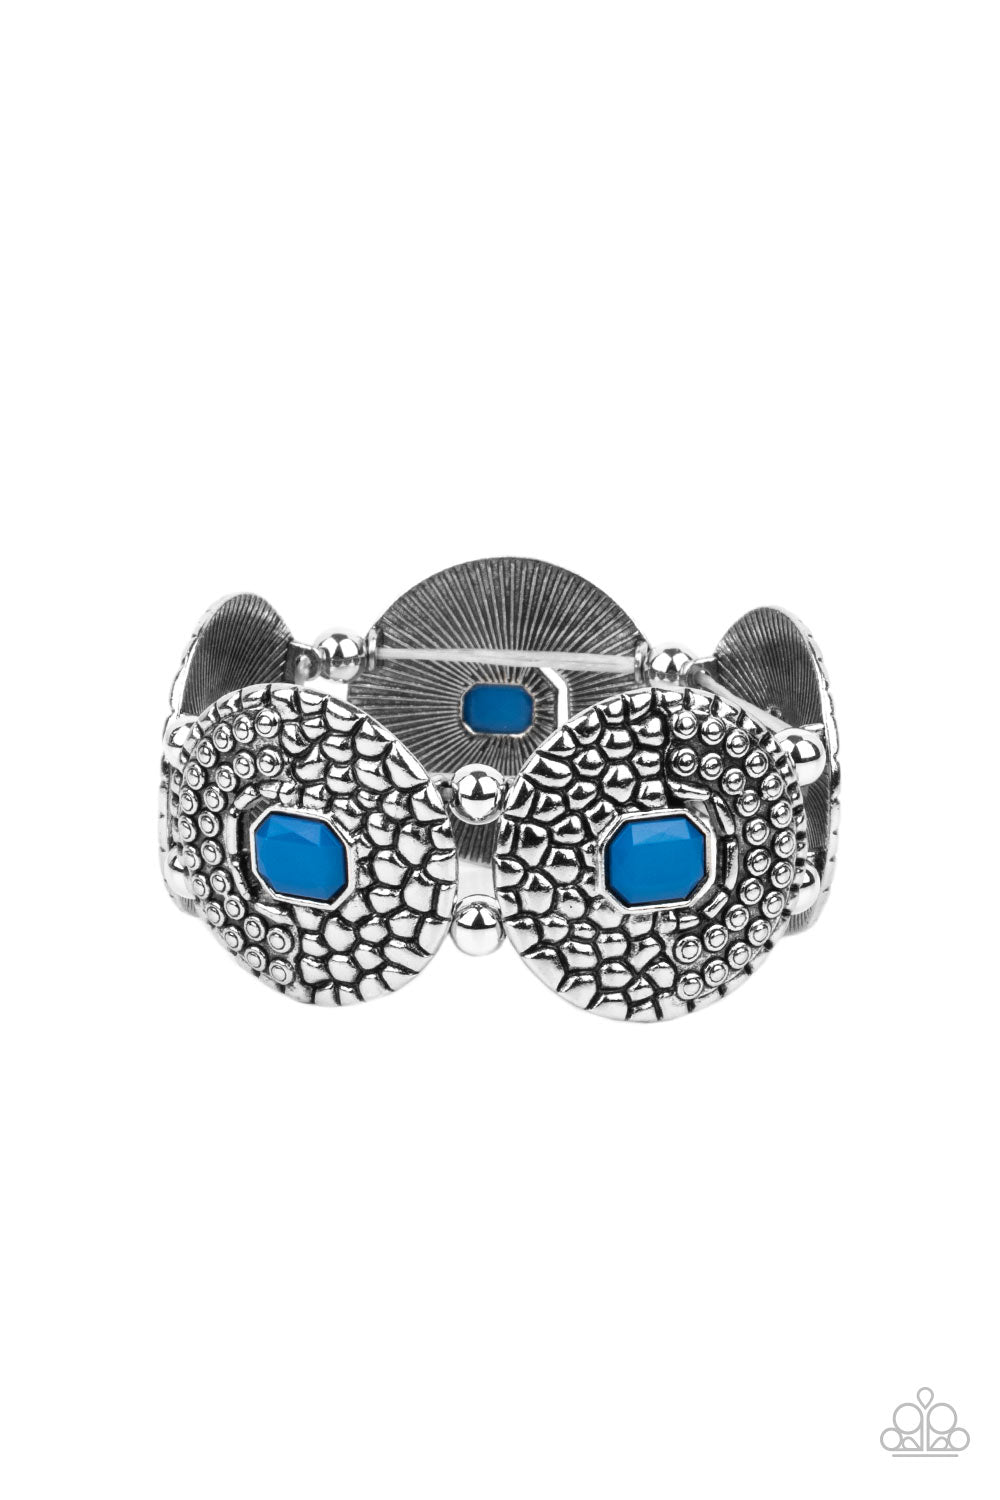 Prismatic Prowl - Blue and Silver Bracelet - Paparazzi Accessories - French Blue emerald shaped beads adorn the centers of round silver discs studded and embossed in metallic croc-like textures. Infused with pairs of silver beads, the decorative frames are threaded along stretchy bands around the wrist for a wild pop of color. Sold as one individual bracelet.